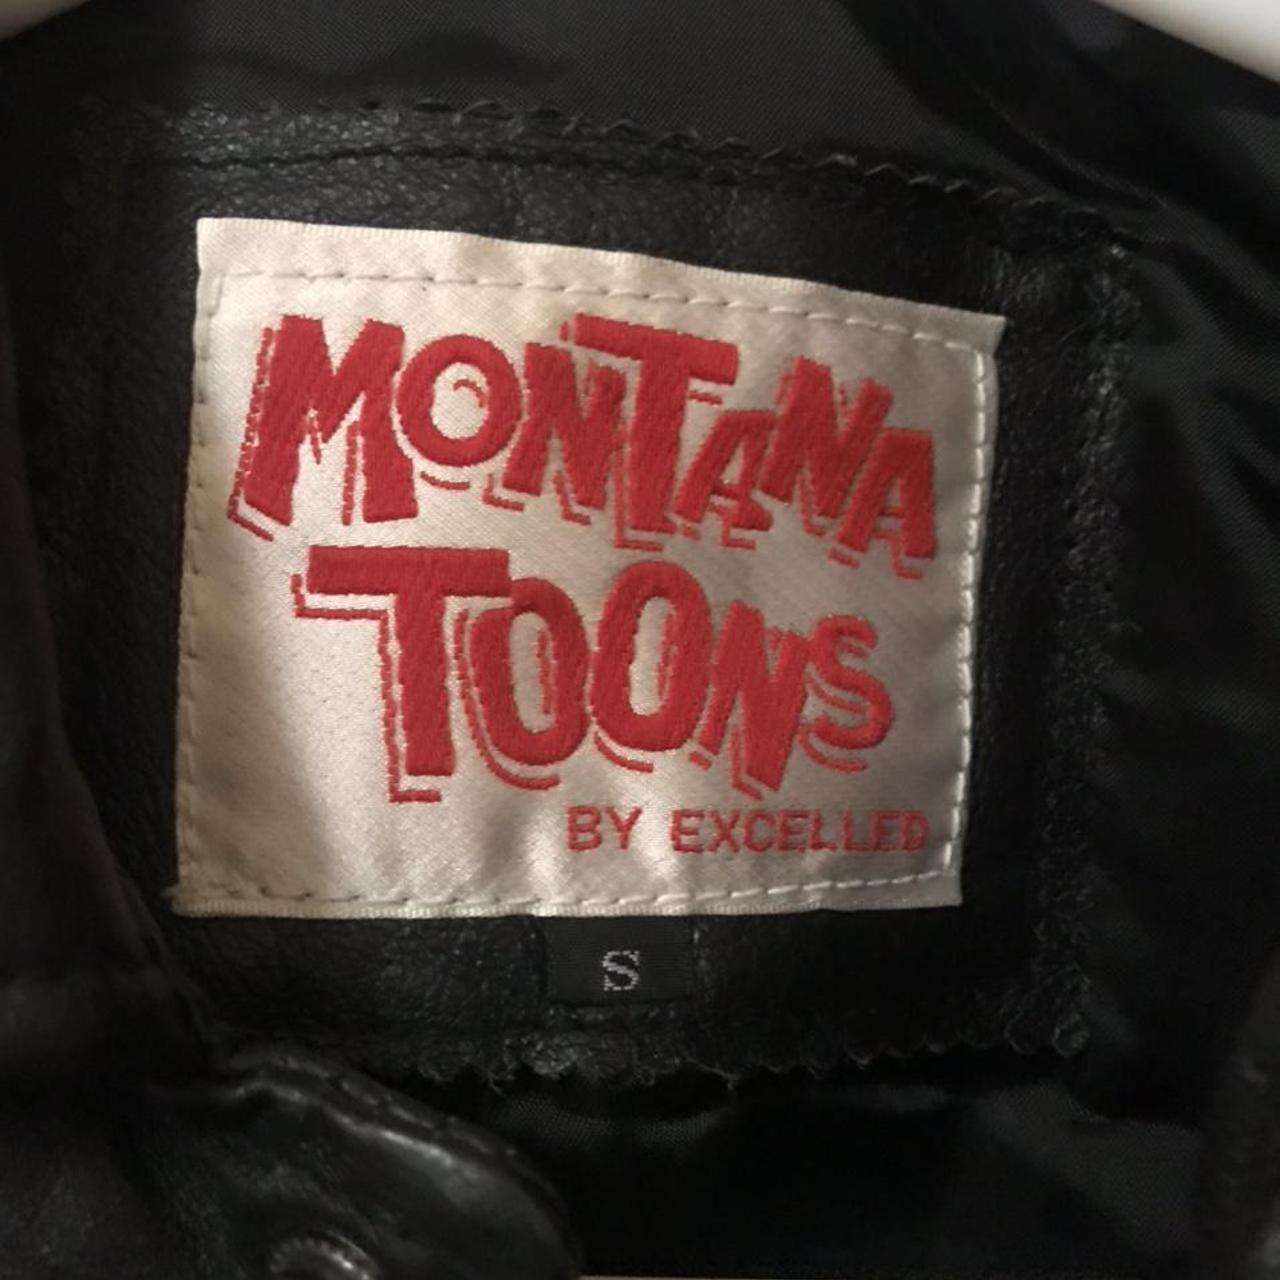 Vintage Montana Toons Betty Boop Leather